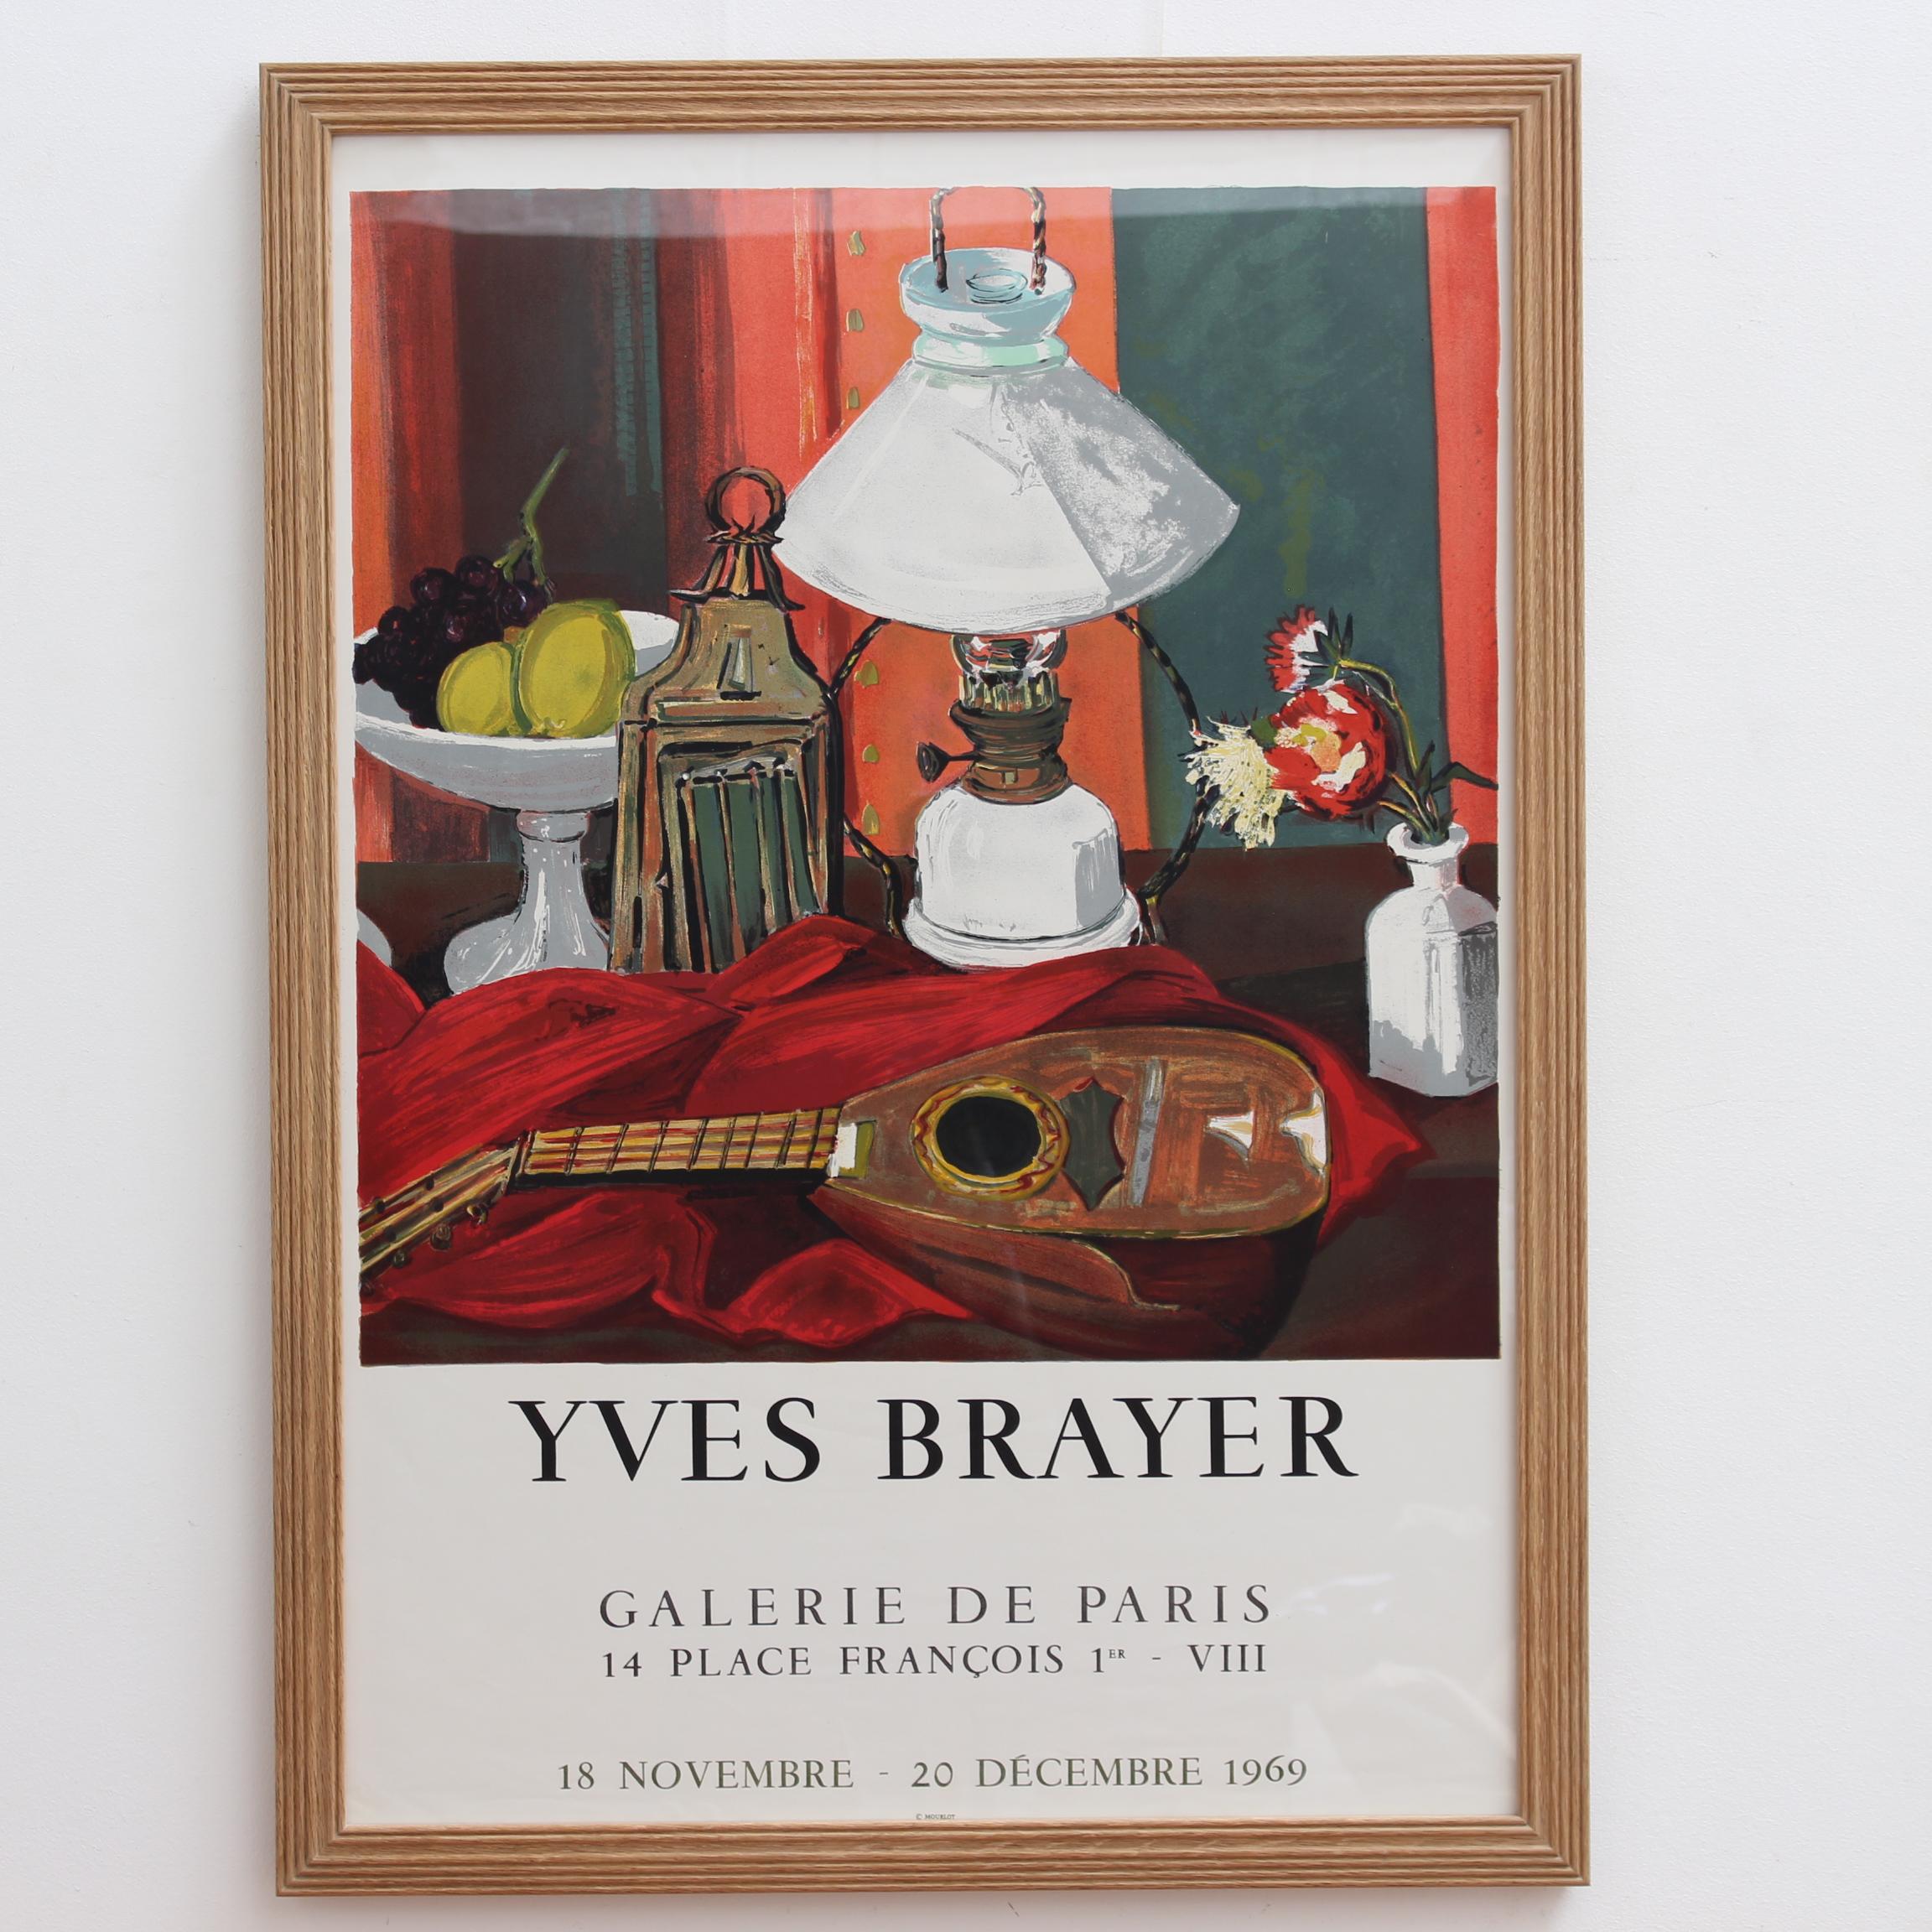 French Vintage Exhibition Poster for Yves Brayer (1969) - Galerie de Paris For Sale 3